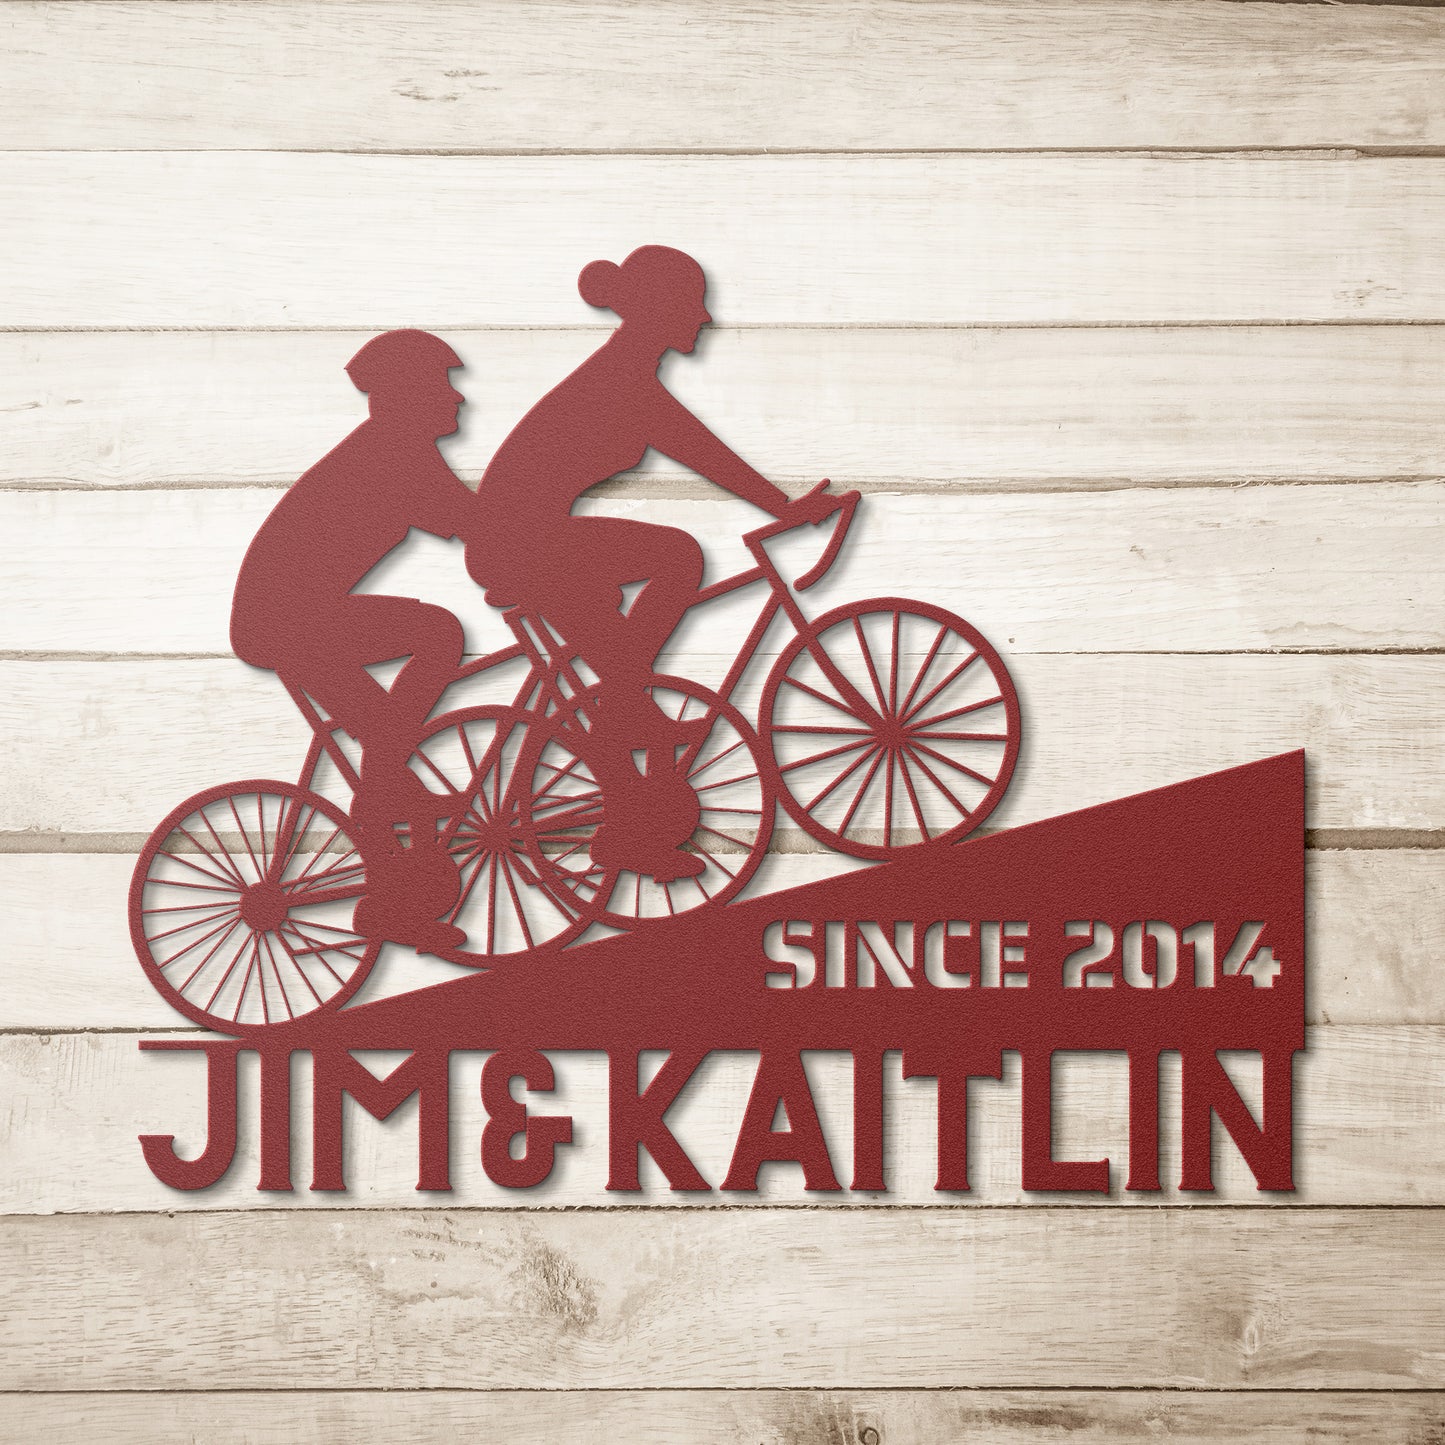 A teelaunch metal sign with the words Jim Katlin since 2016, made from 18 gauge steel and powder coated for durability.